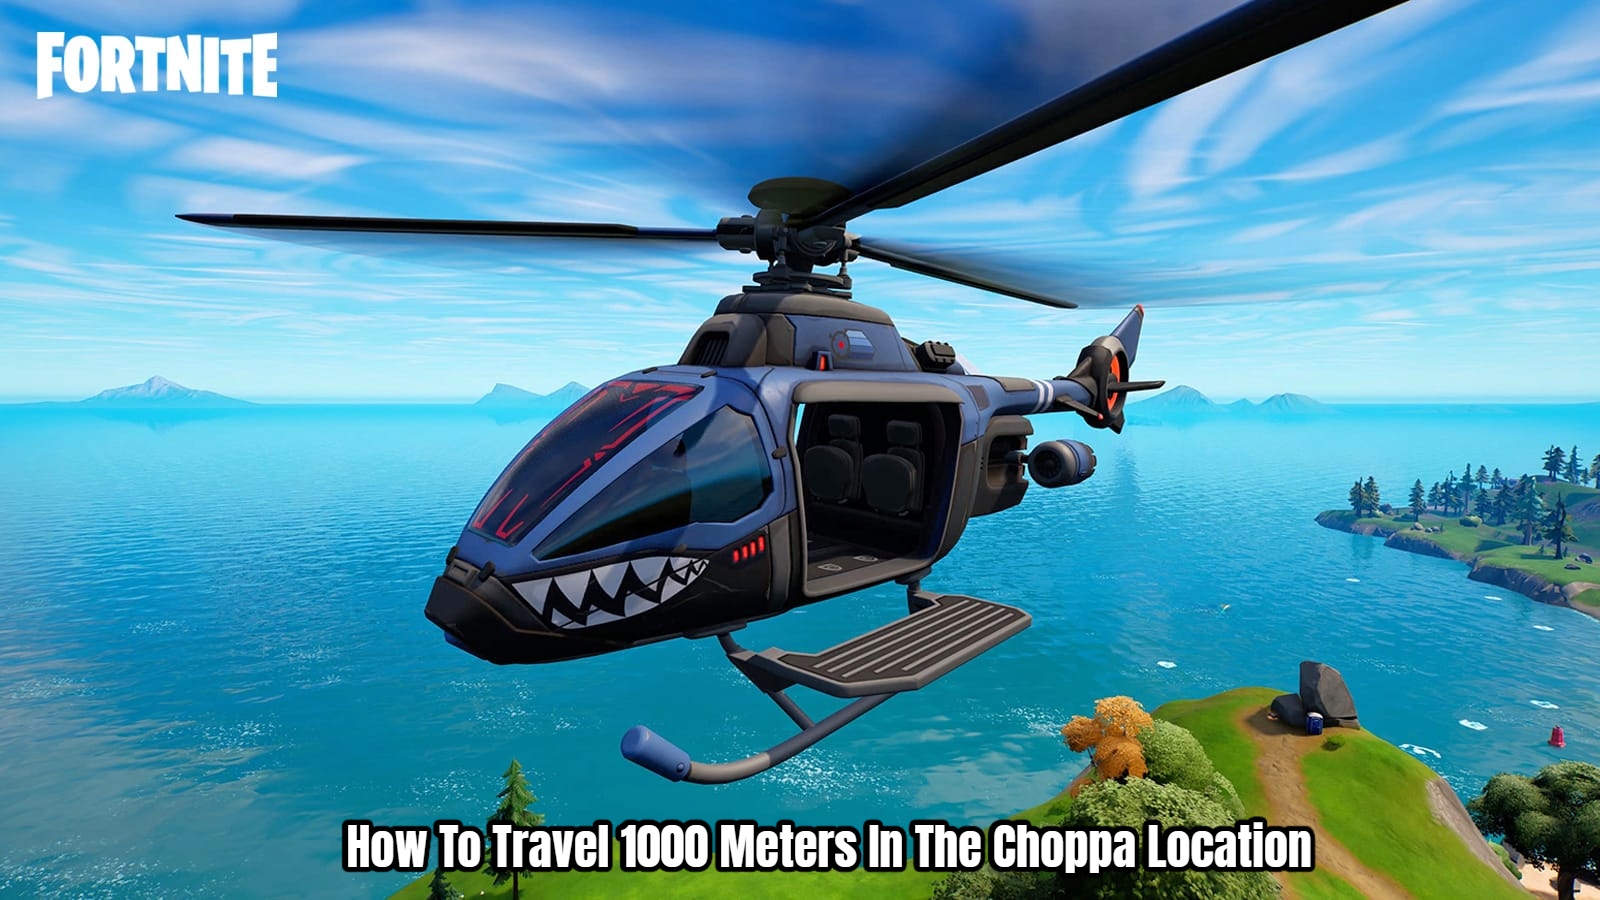 You are currently viewing Fortnite: How To Travel 1000 Meters In The Choppa Location